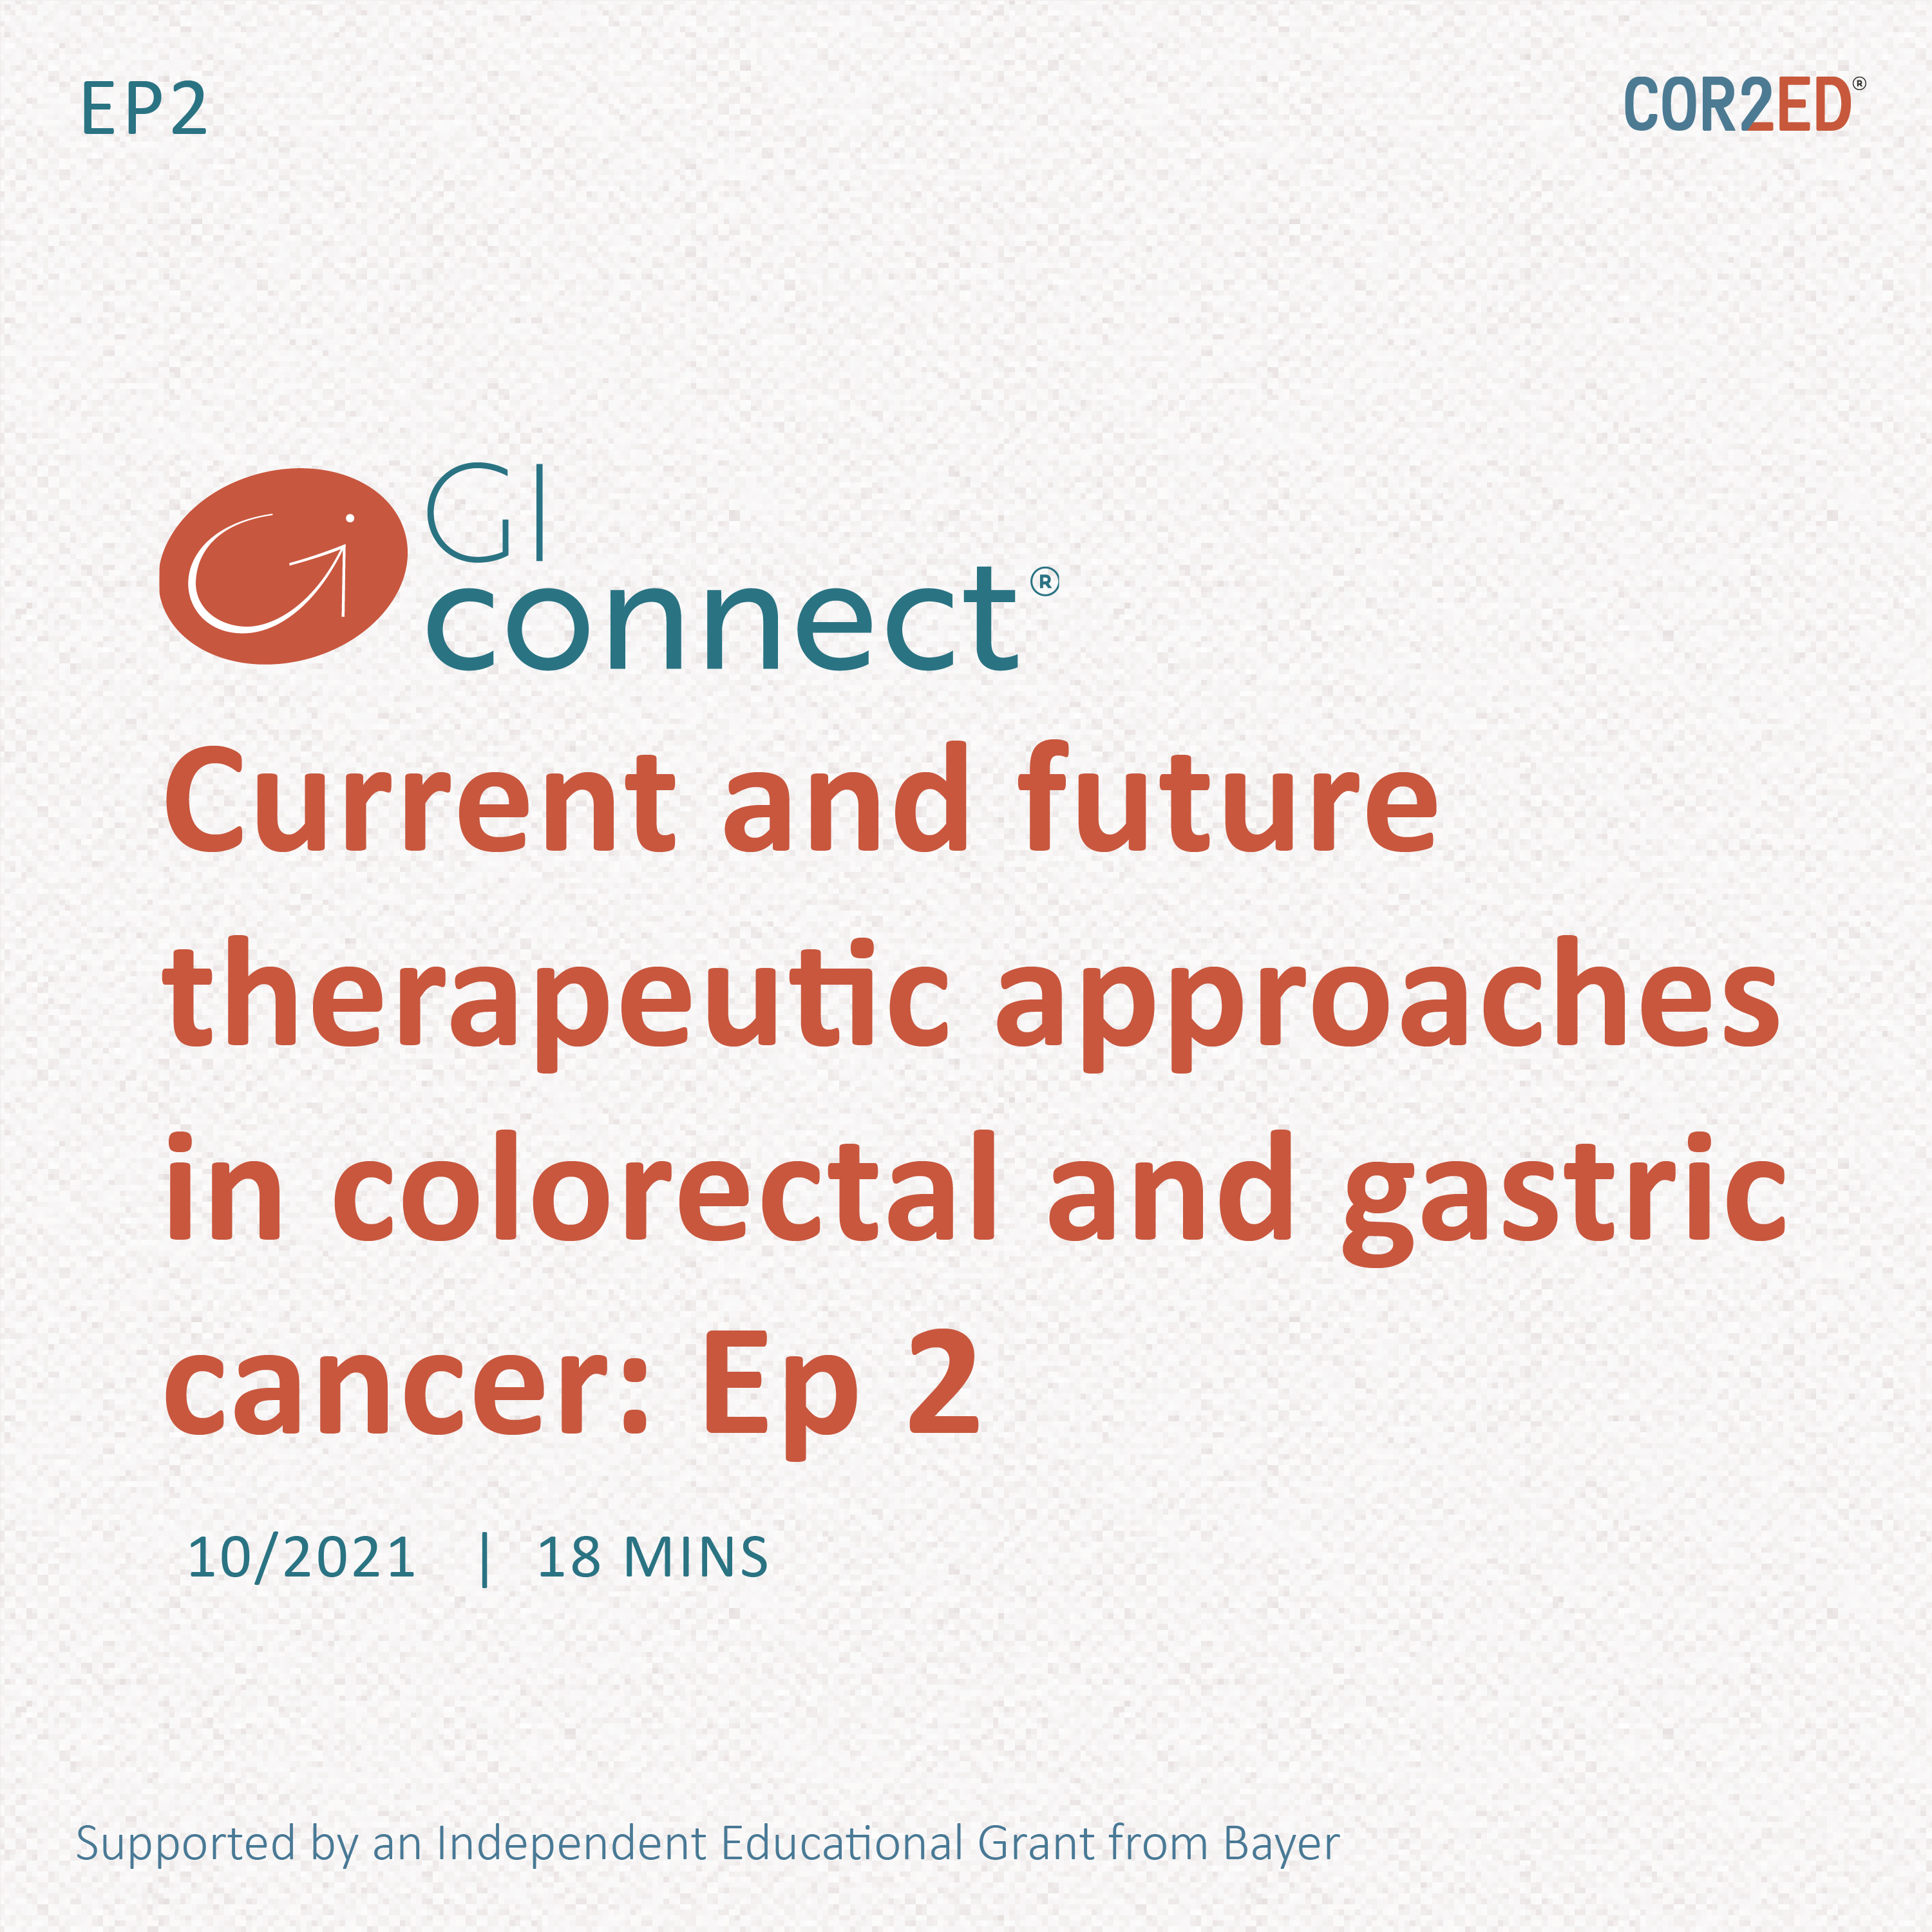 Current and Future Therapeutic Approaches in Colorectal and Gastric Cancer: Immunotherapy - Ep 2